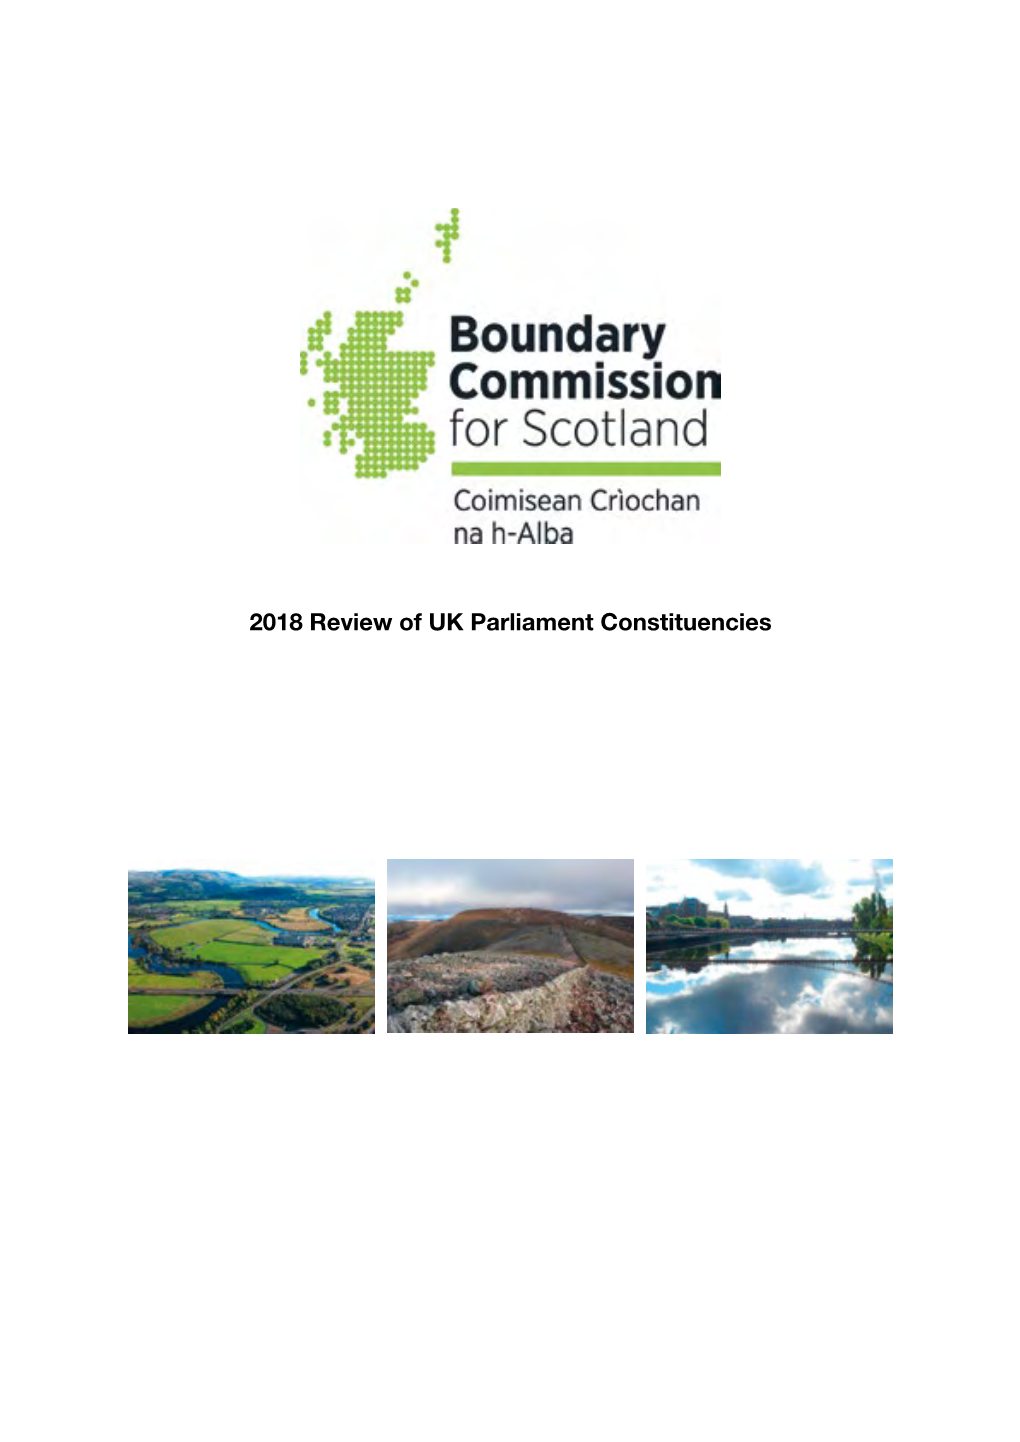 2018 Review of UK Parliament Constituencies the Boundary Commission for Scotland